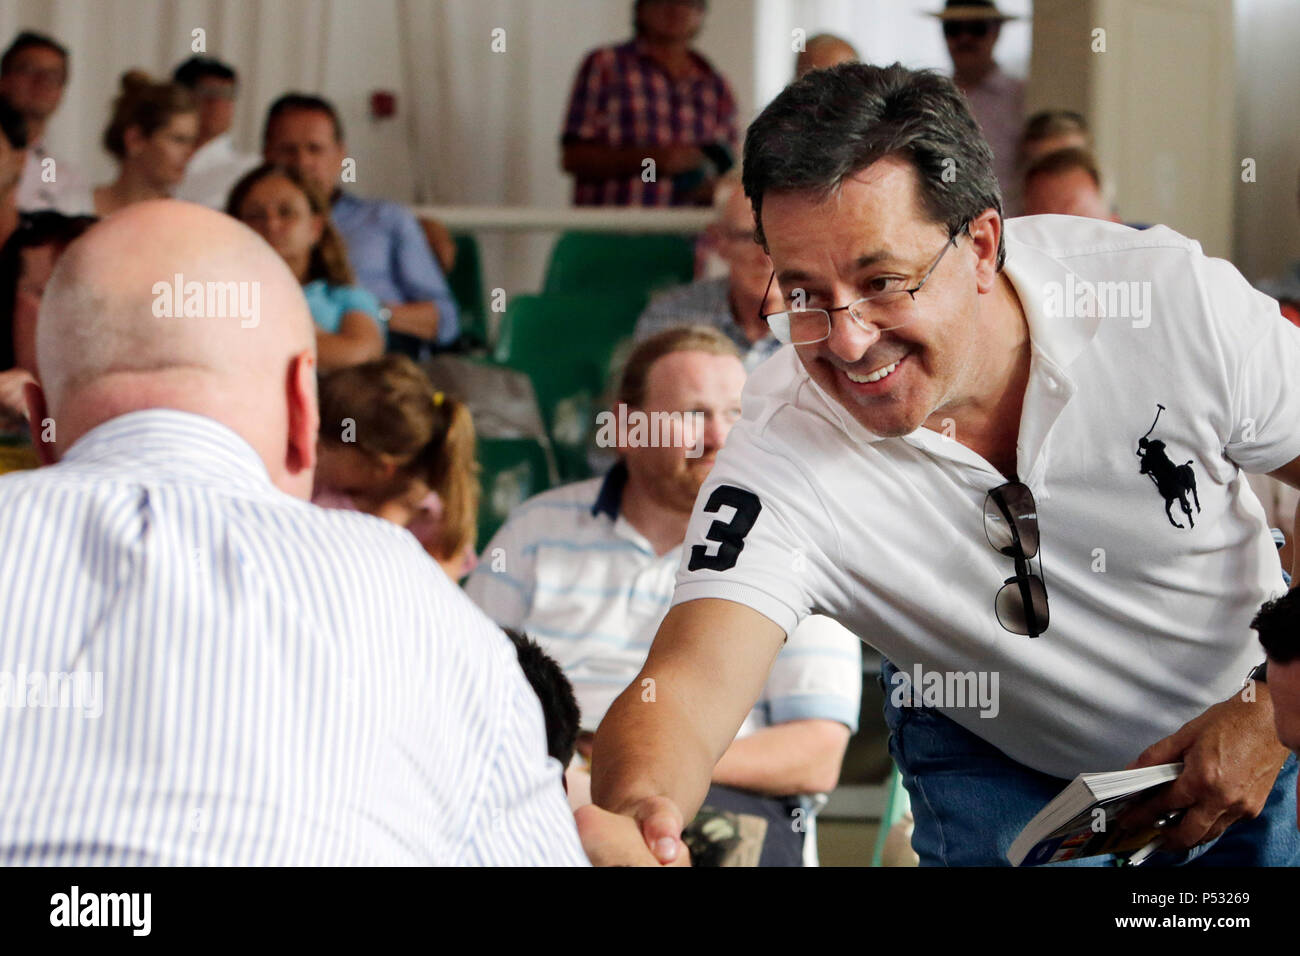 Iffezheim, Baden-Wuerttemberg, Germany - Markus Jooste, Manager and former CEO of Steinhoff International Holdings Stock Photo